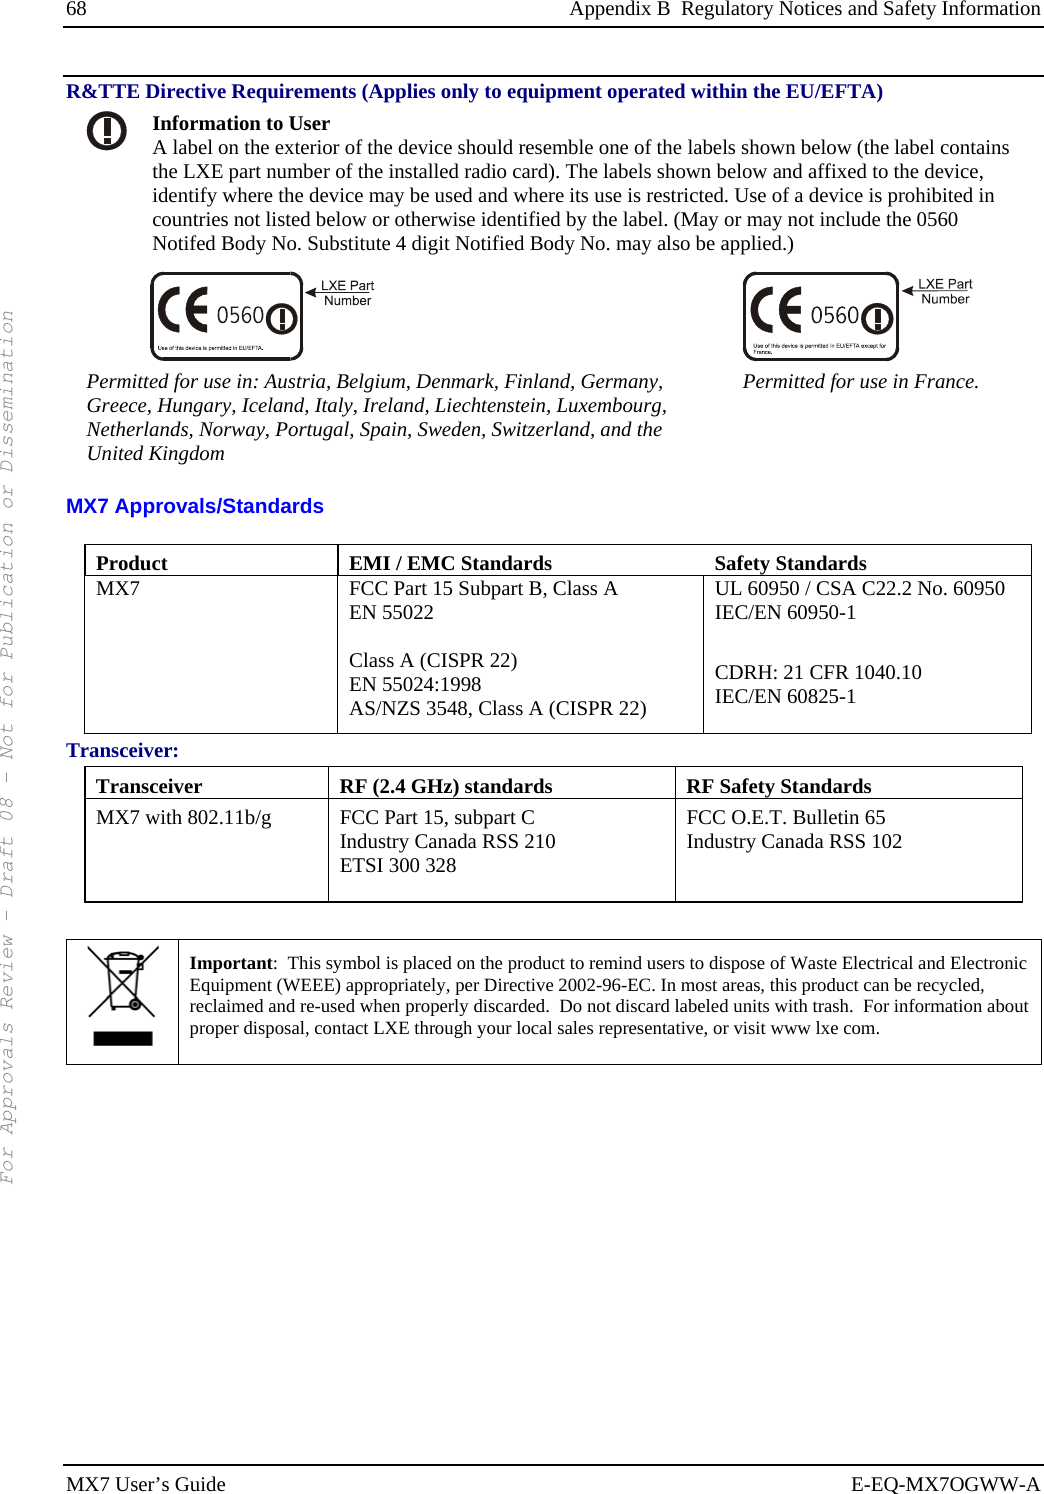 68  Appendix B  Regulatory Notices and Safety Information MX7 User’s Guide  E-EQ-MX7OGWW-A R&amp;TTE Directive Requirements (Applies only to equipment operated within the EU/EFTA)  Information to User A label on the exterior of the device should resemble one of the labels shown below (the label contains the LXE part number of the installed radio card). The labels shown below and affixed to the device, identify where the device may be used and where its use is restricted. Use of a device is prohibited in countries not listed below or otherwise identified by the label. (May or may not include the 0560 Notifed Body No. Substitute 4 digit Notified Body No. may also be applied.)   Permitted for use in: Austria, Belgium, Denmark, Finland, Germany, Greece, Hungary, Iceland, Italy, Ireland, Liechtenstein, Luxembourg, Netherlands, Norway, Portugal, Spain, Sweden, Switzerland, and the United Kingdom Permitted for use in France. MX7 Approvals/Standards  Product  EMI / EMC Standards   Safety Standards MX7  FCC Part 15 Subpart B, Class A EN 55022  Class A (CISPR 22) EN 55024:1998 AS/NZS 3548, Class A (CISPR 22) UL 60950 / CSA C22.2 No. 60950 IEC/EN 60950-1  CDRH: 21 CFR 1040.10 IEC/EN 60825-1 Transceiver: Transceiver  RF (2.4 GHz) standards  RF Safety Standards MX7 with 802.11b/g  FCC Part 15, subpart C Industry Canada RSS 210 ETSI 300 328  FCC O.E.T. Bulletin 65 Industry Canada RSS 102   Important:  This symbol is placed on the product to remind users to dispose of Waste Electrical and Electronic Equipment (WEEE) appropriately, per Directive 2002-96-EC. In most areas, this product can be recycled, reclaimed and re-used when properly discarded.  Do not discard labeled units with trash.  For information about proper disposal, contact LXE through your local sales representative, or visit www lxe com.  For Approvals Review - Draft 08 - Not for Publication or Dissemination